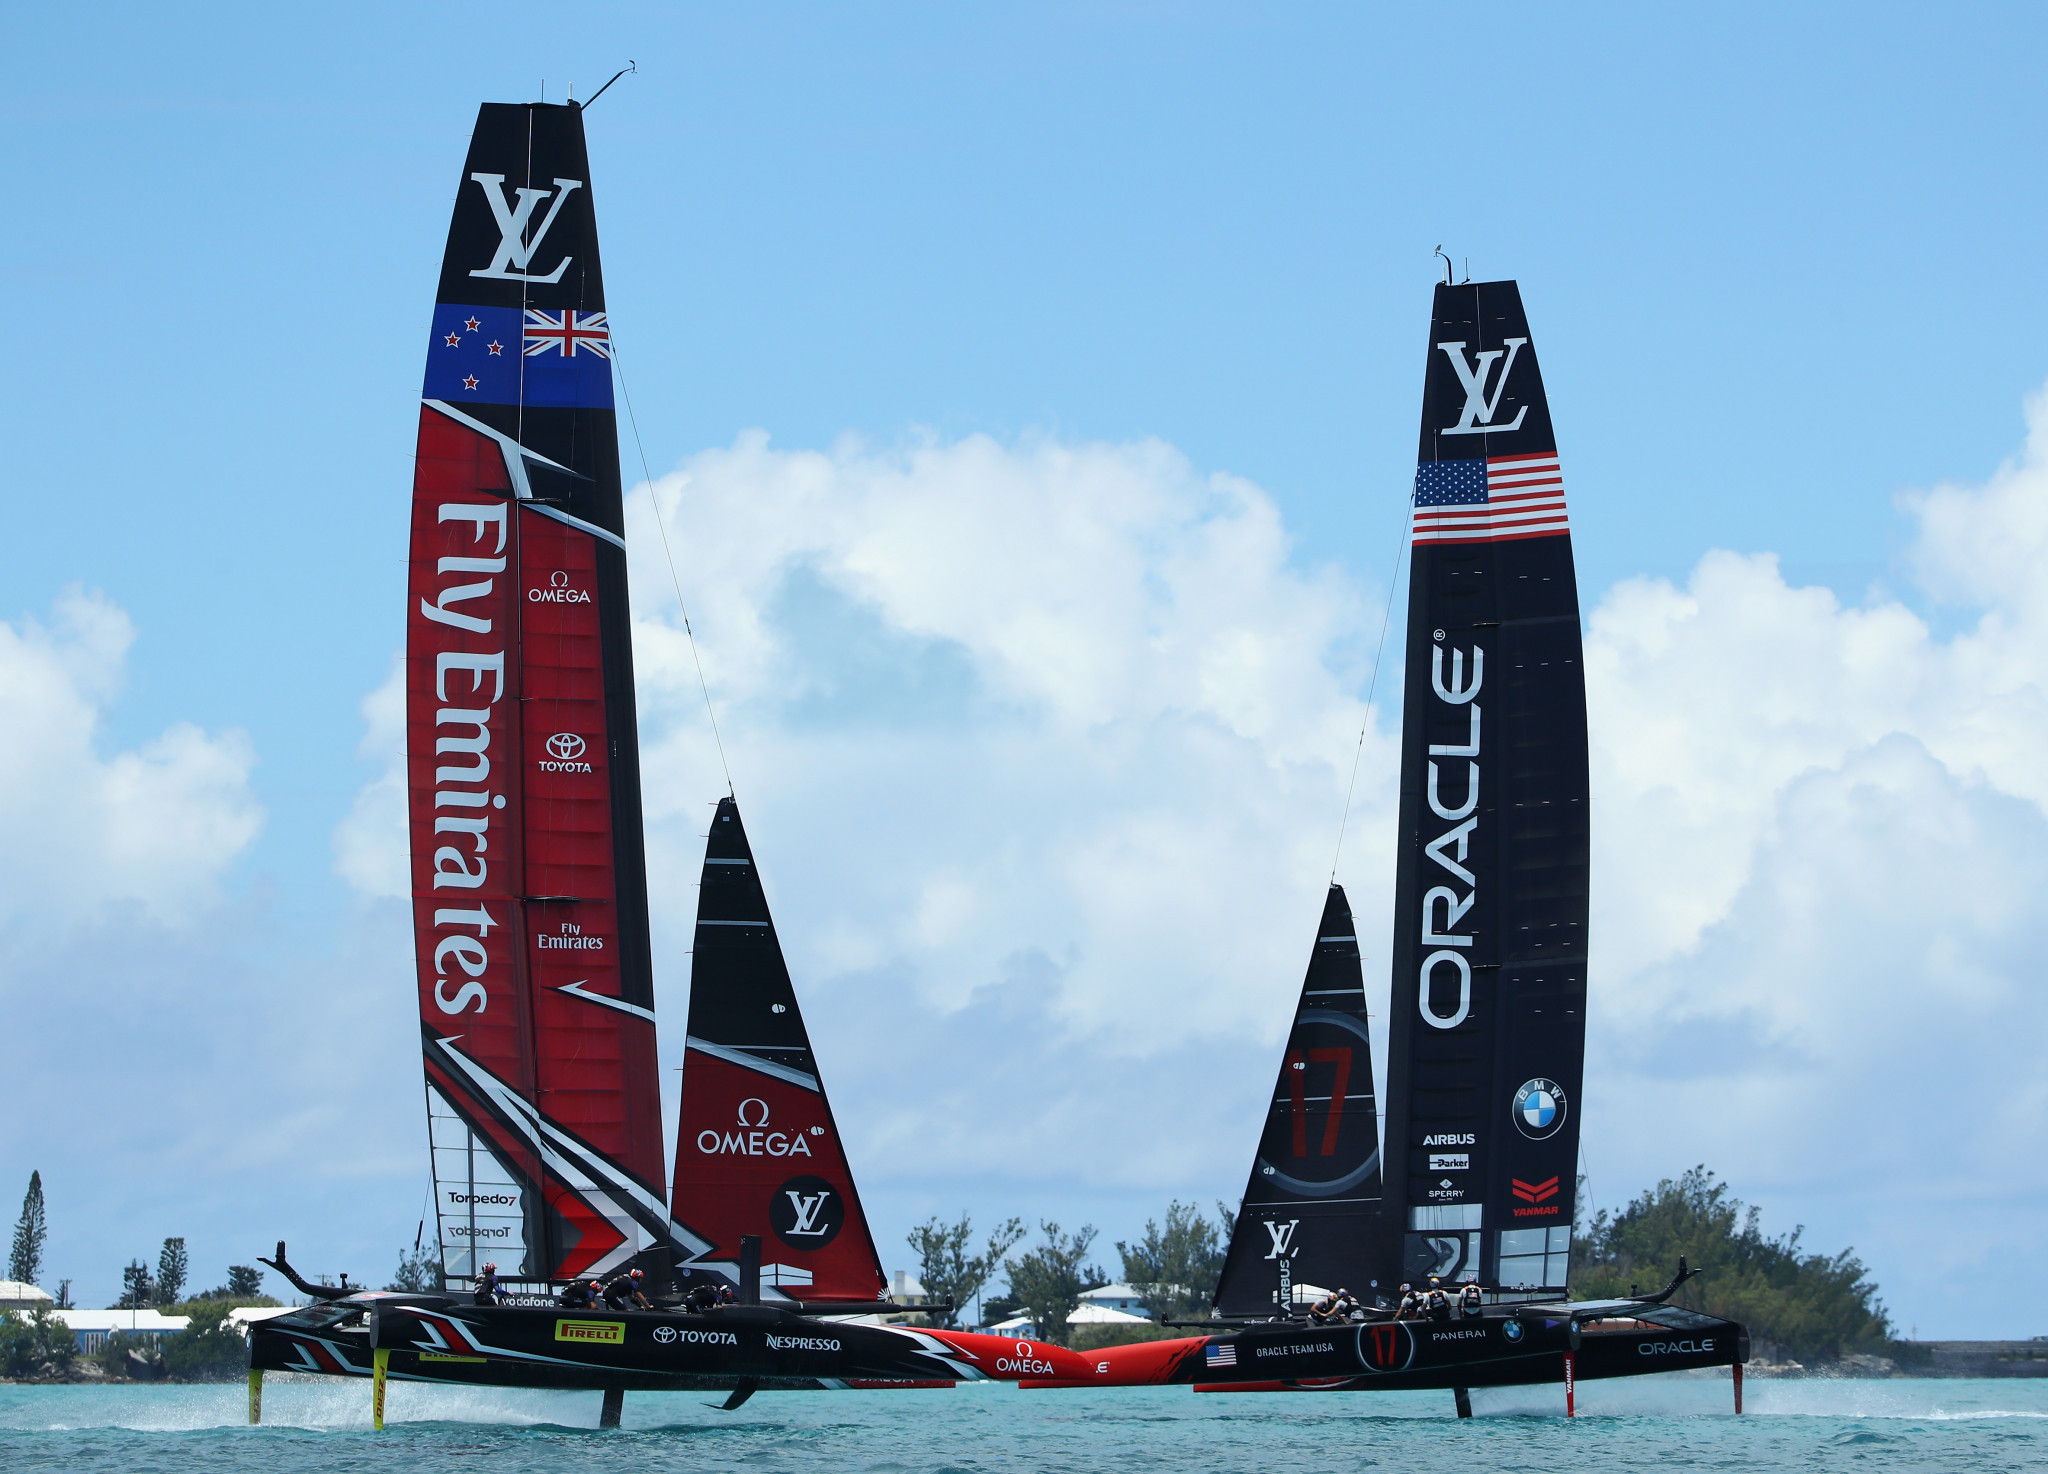 Team NZ and America's Cup rivals able to practise despite COVID-19 restrictions